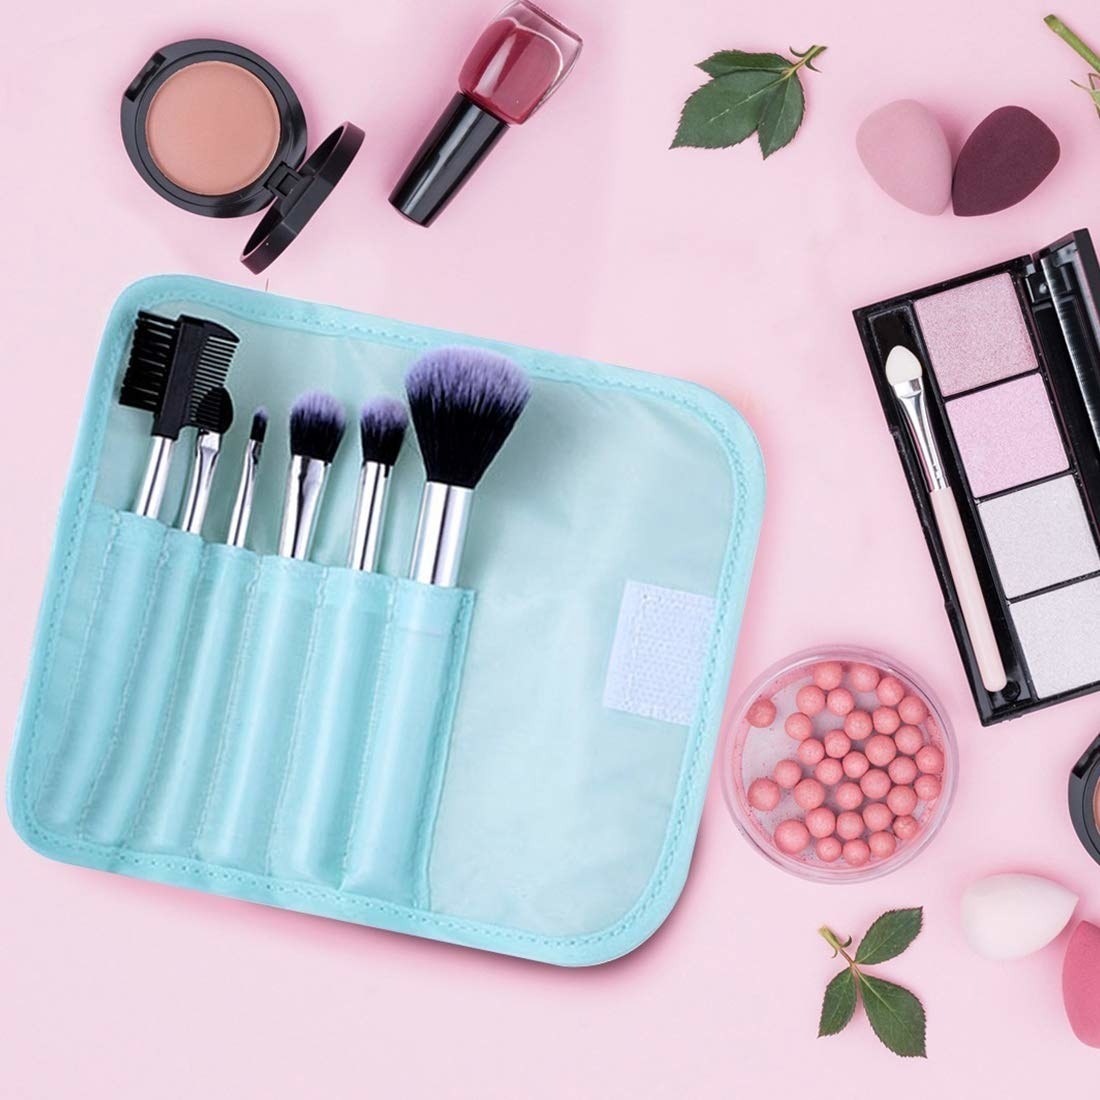 A blue kit with makeup brushes in it